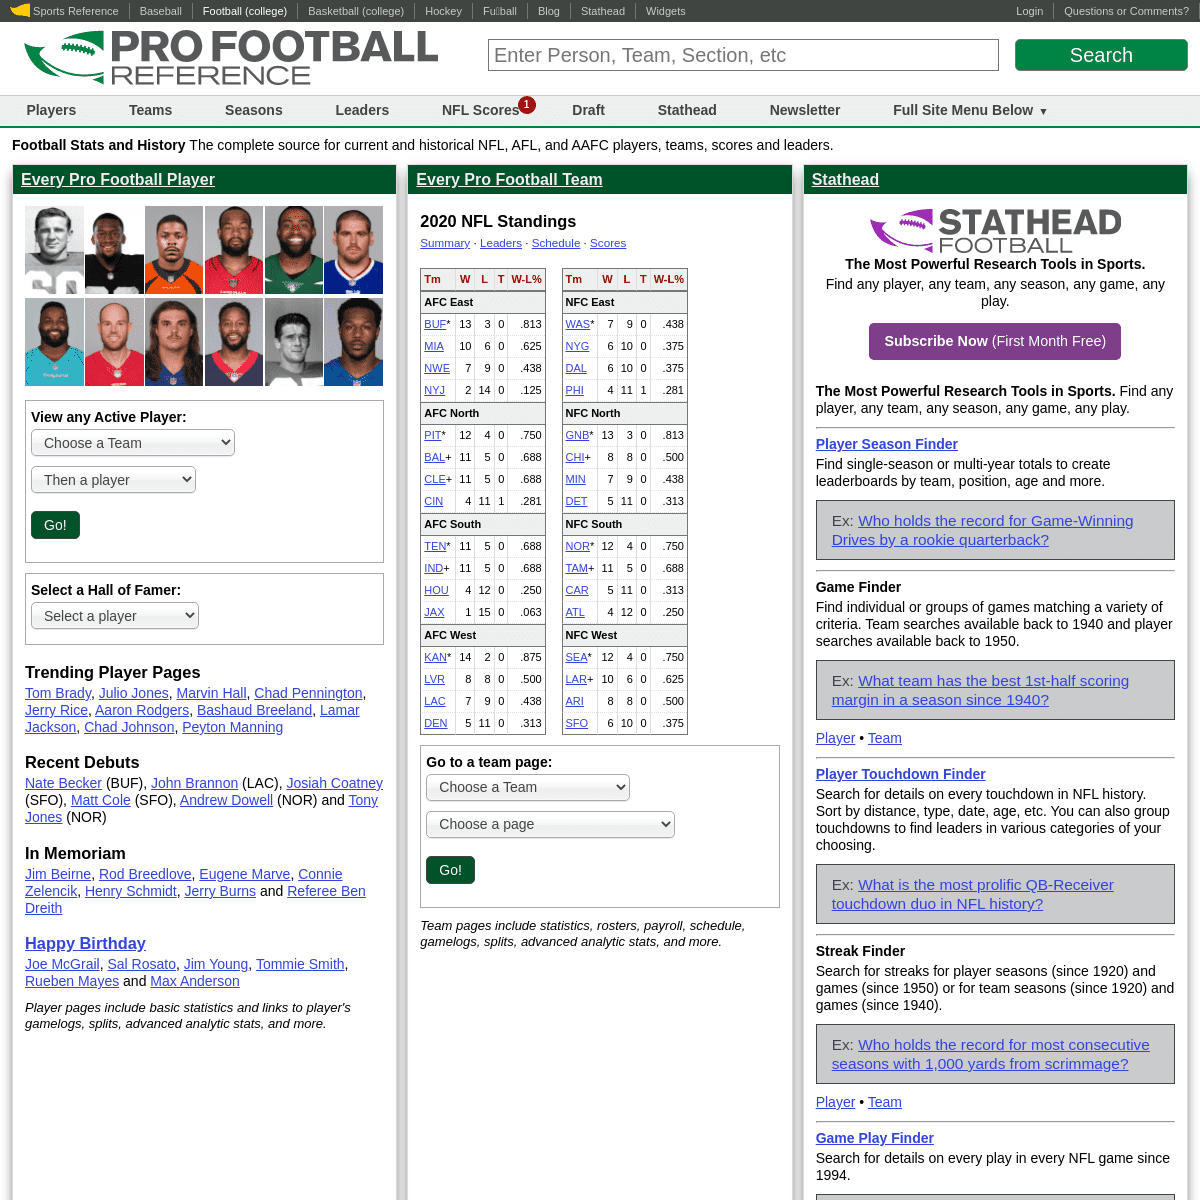 A complete backup of https://pro-football-reference.com